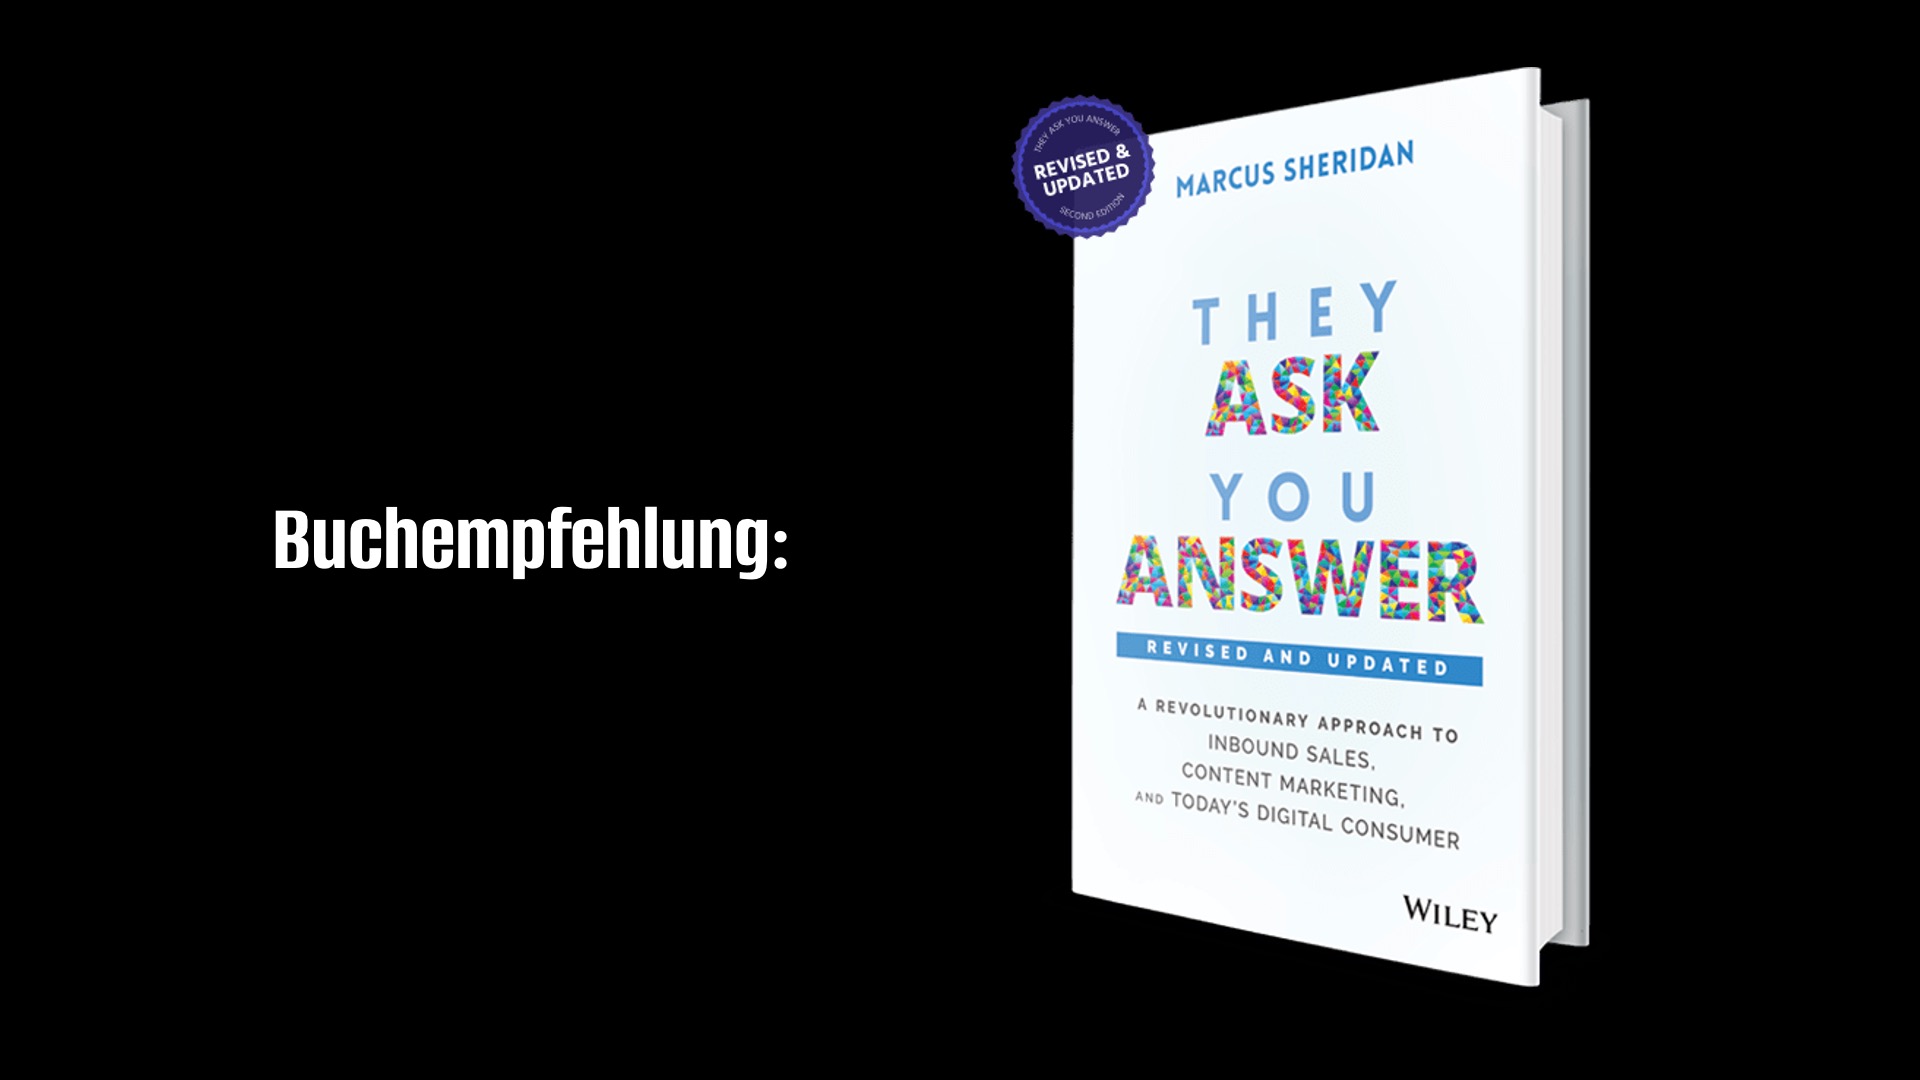 Buchempfehlung: They ask you answer von Marcus Sheridan